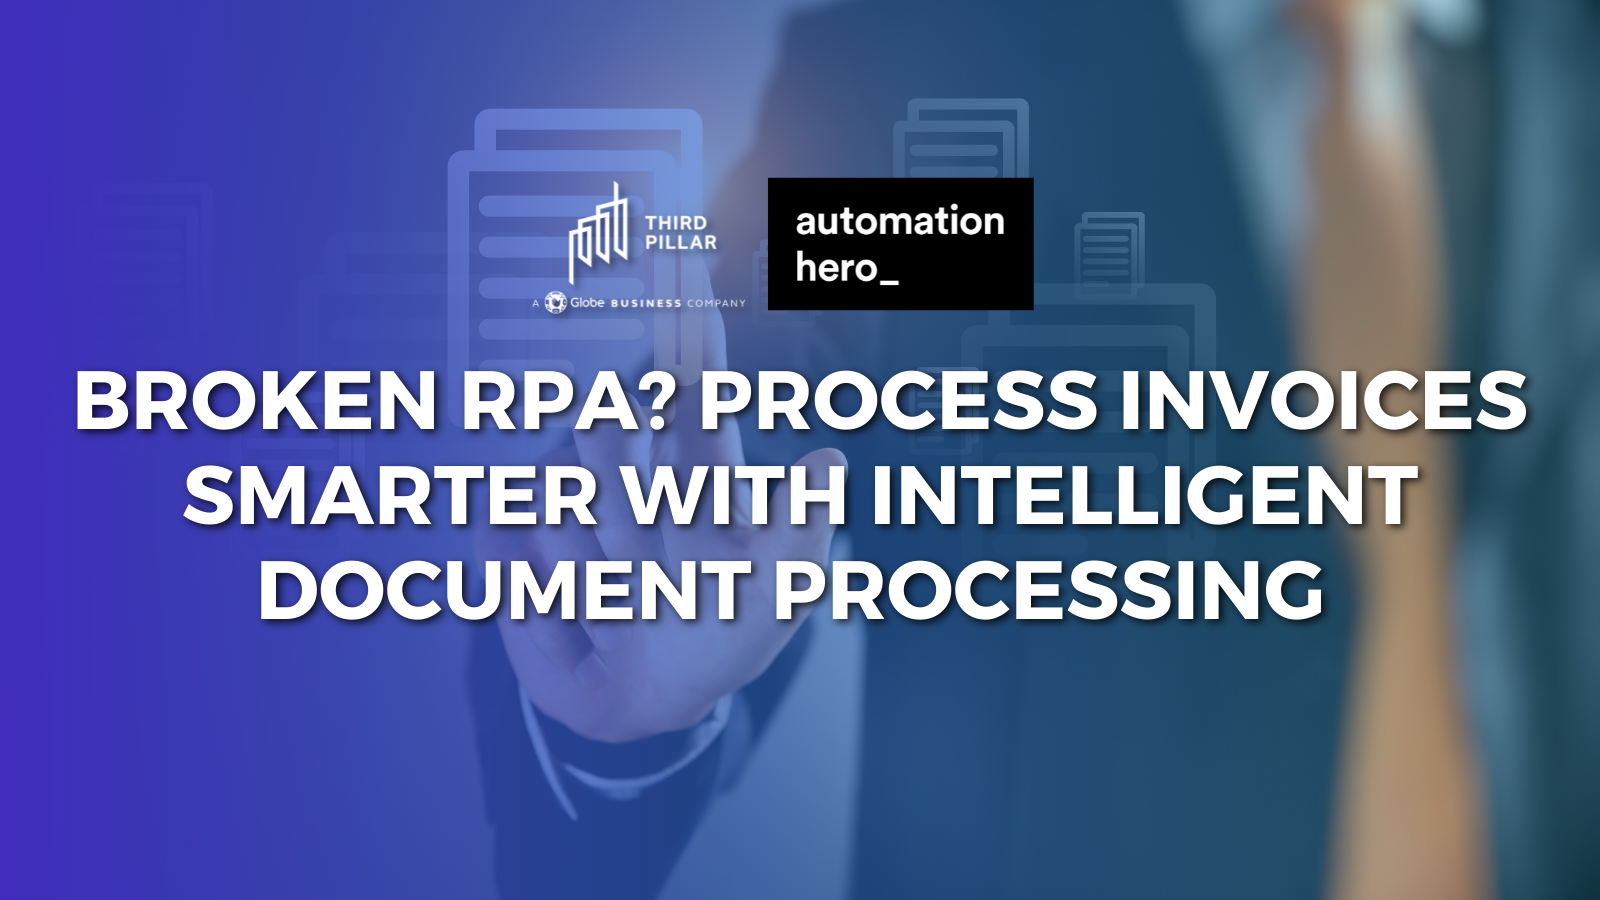 Broken RPA? Process invoices smarter with intelligent document processing